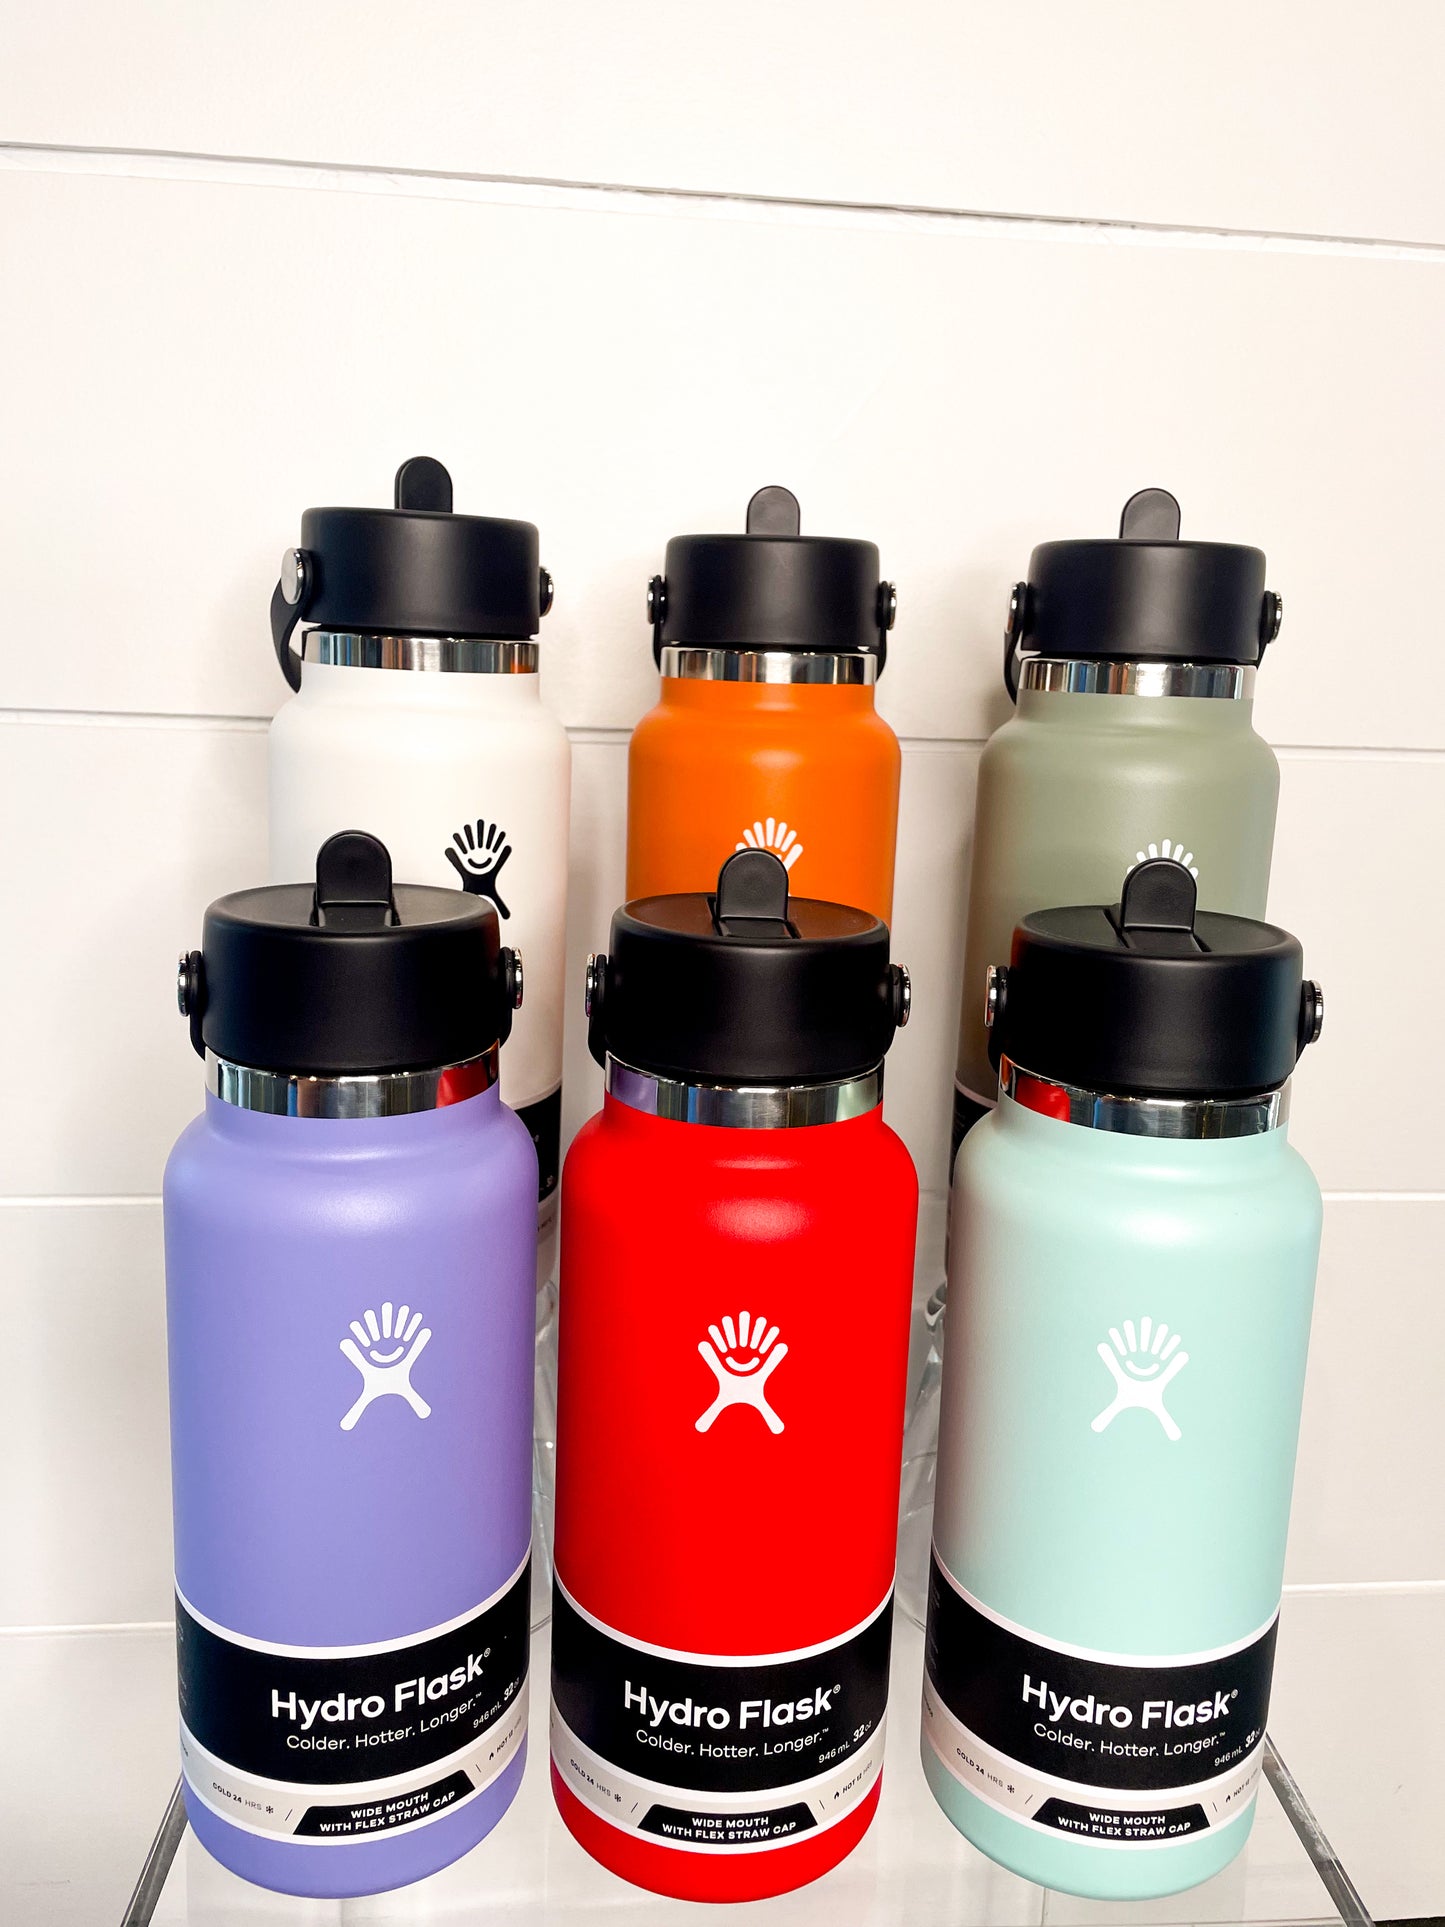 Hydro Flask Wide Mouth Water Bottle with Flex Straw Cap, 32 oz.